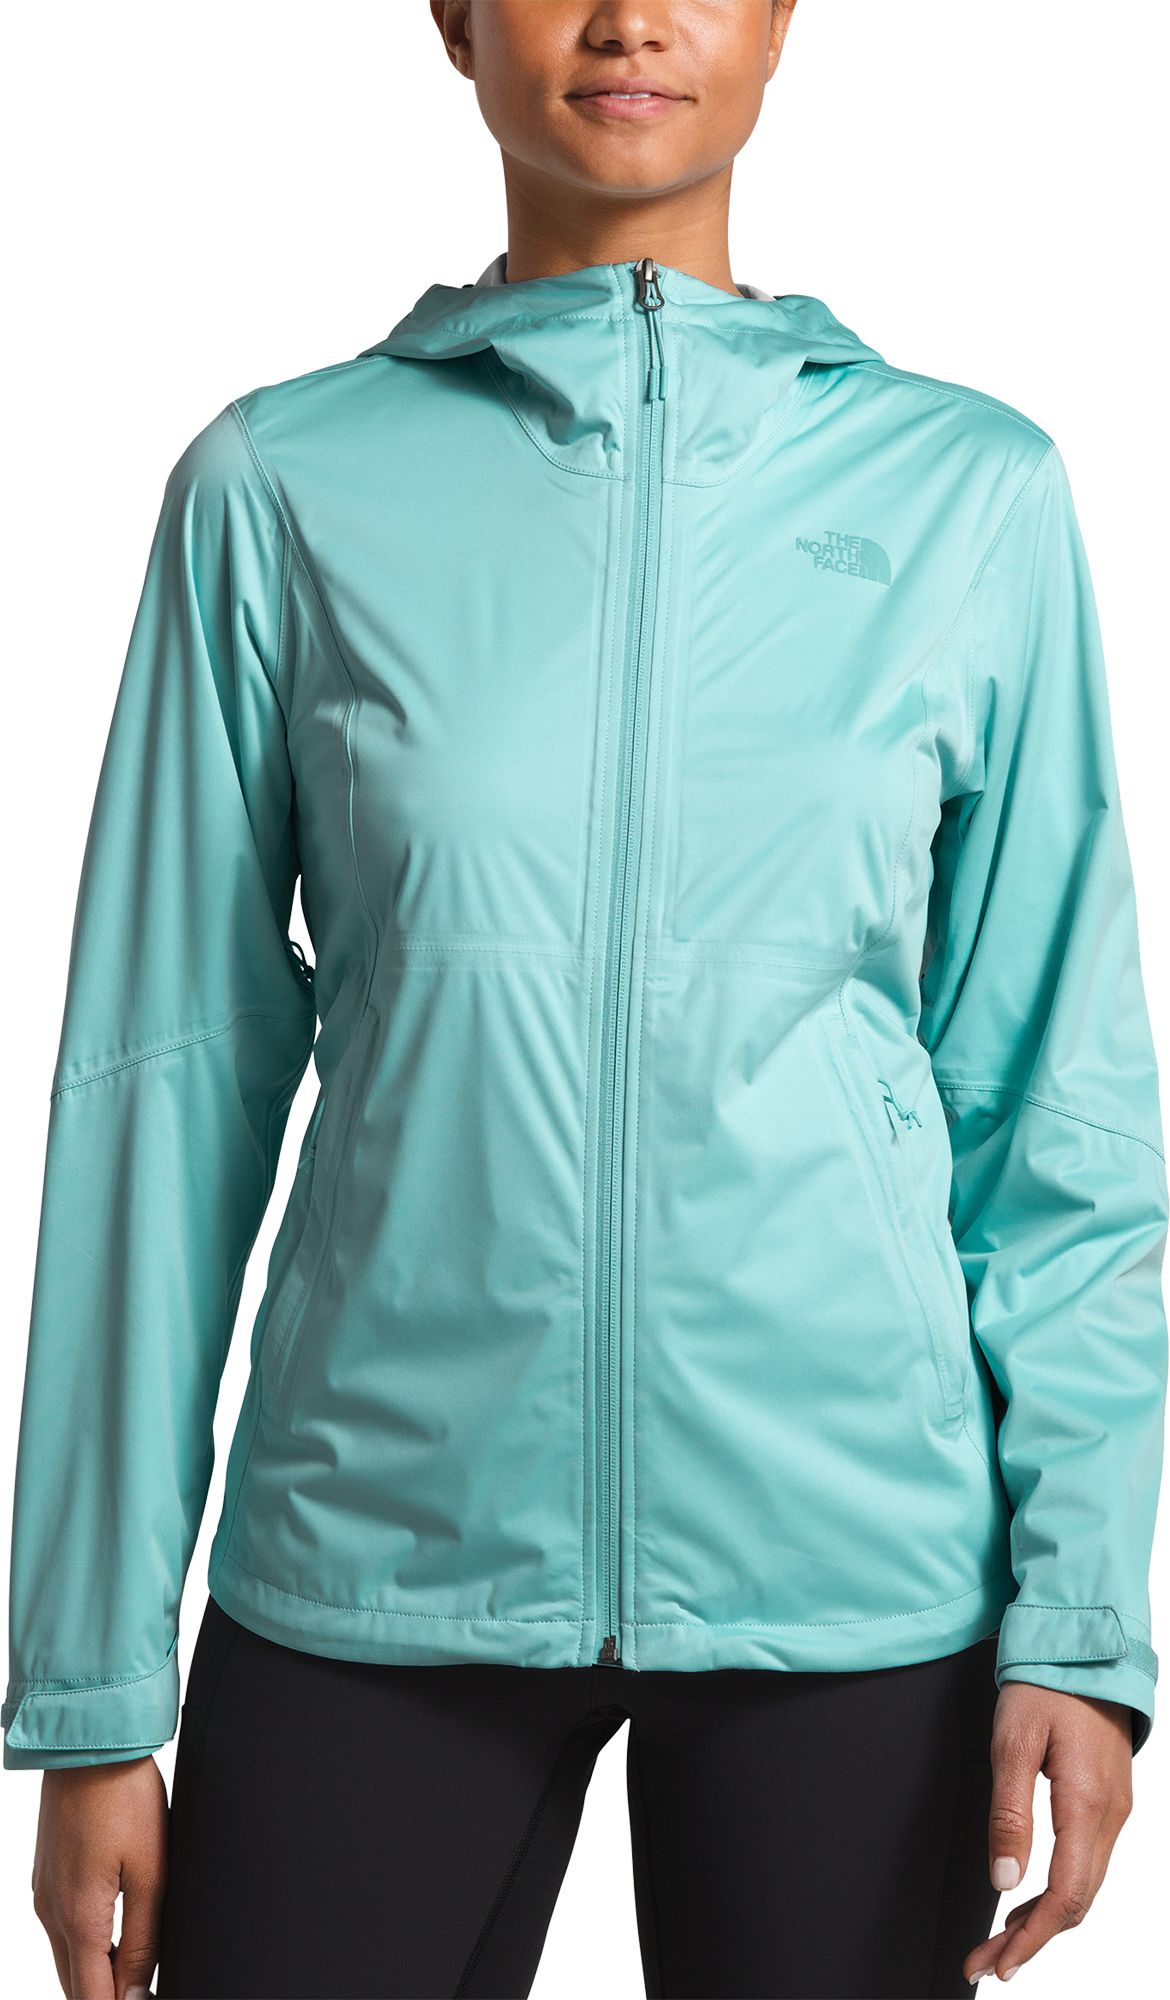 allproof stretch jacket north face